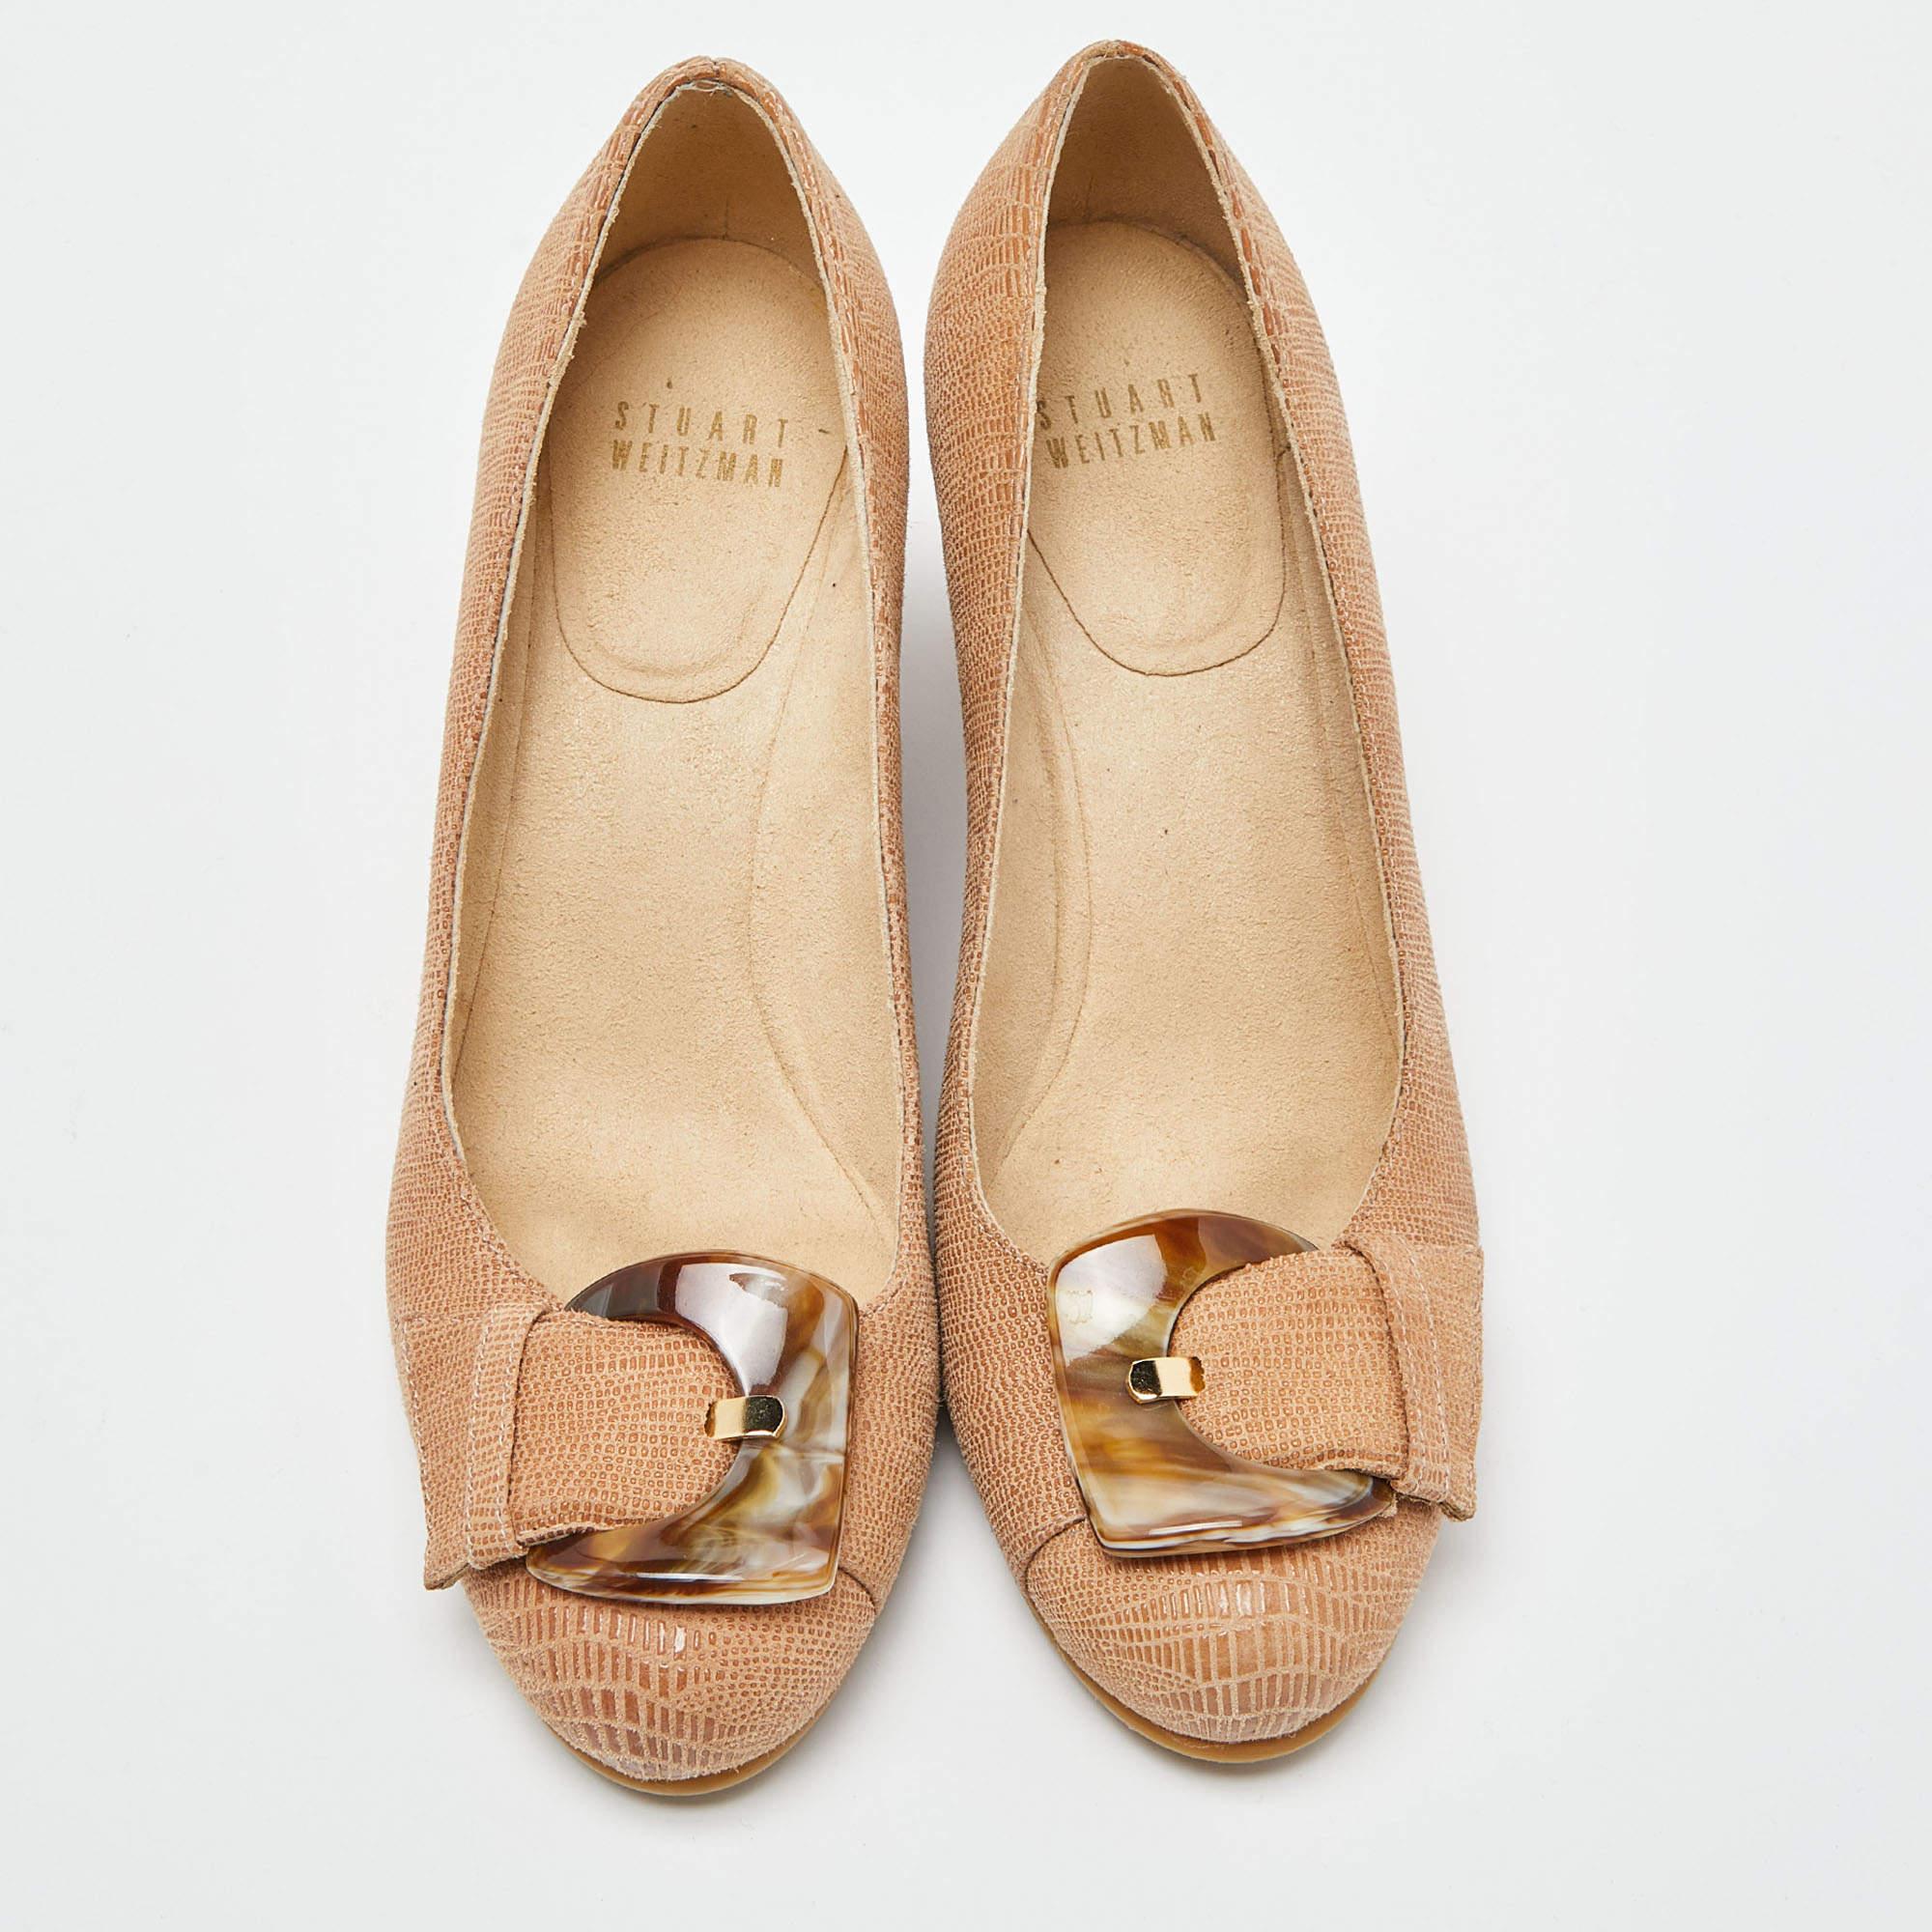 Exuding femininity and elegance, these Stuart Weitzman pumps feature a chic silhouette with an attractive design. You can wear these pumps for a stylish look.

Includes: Original Dustbag

